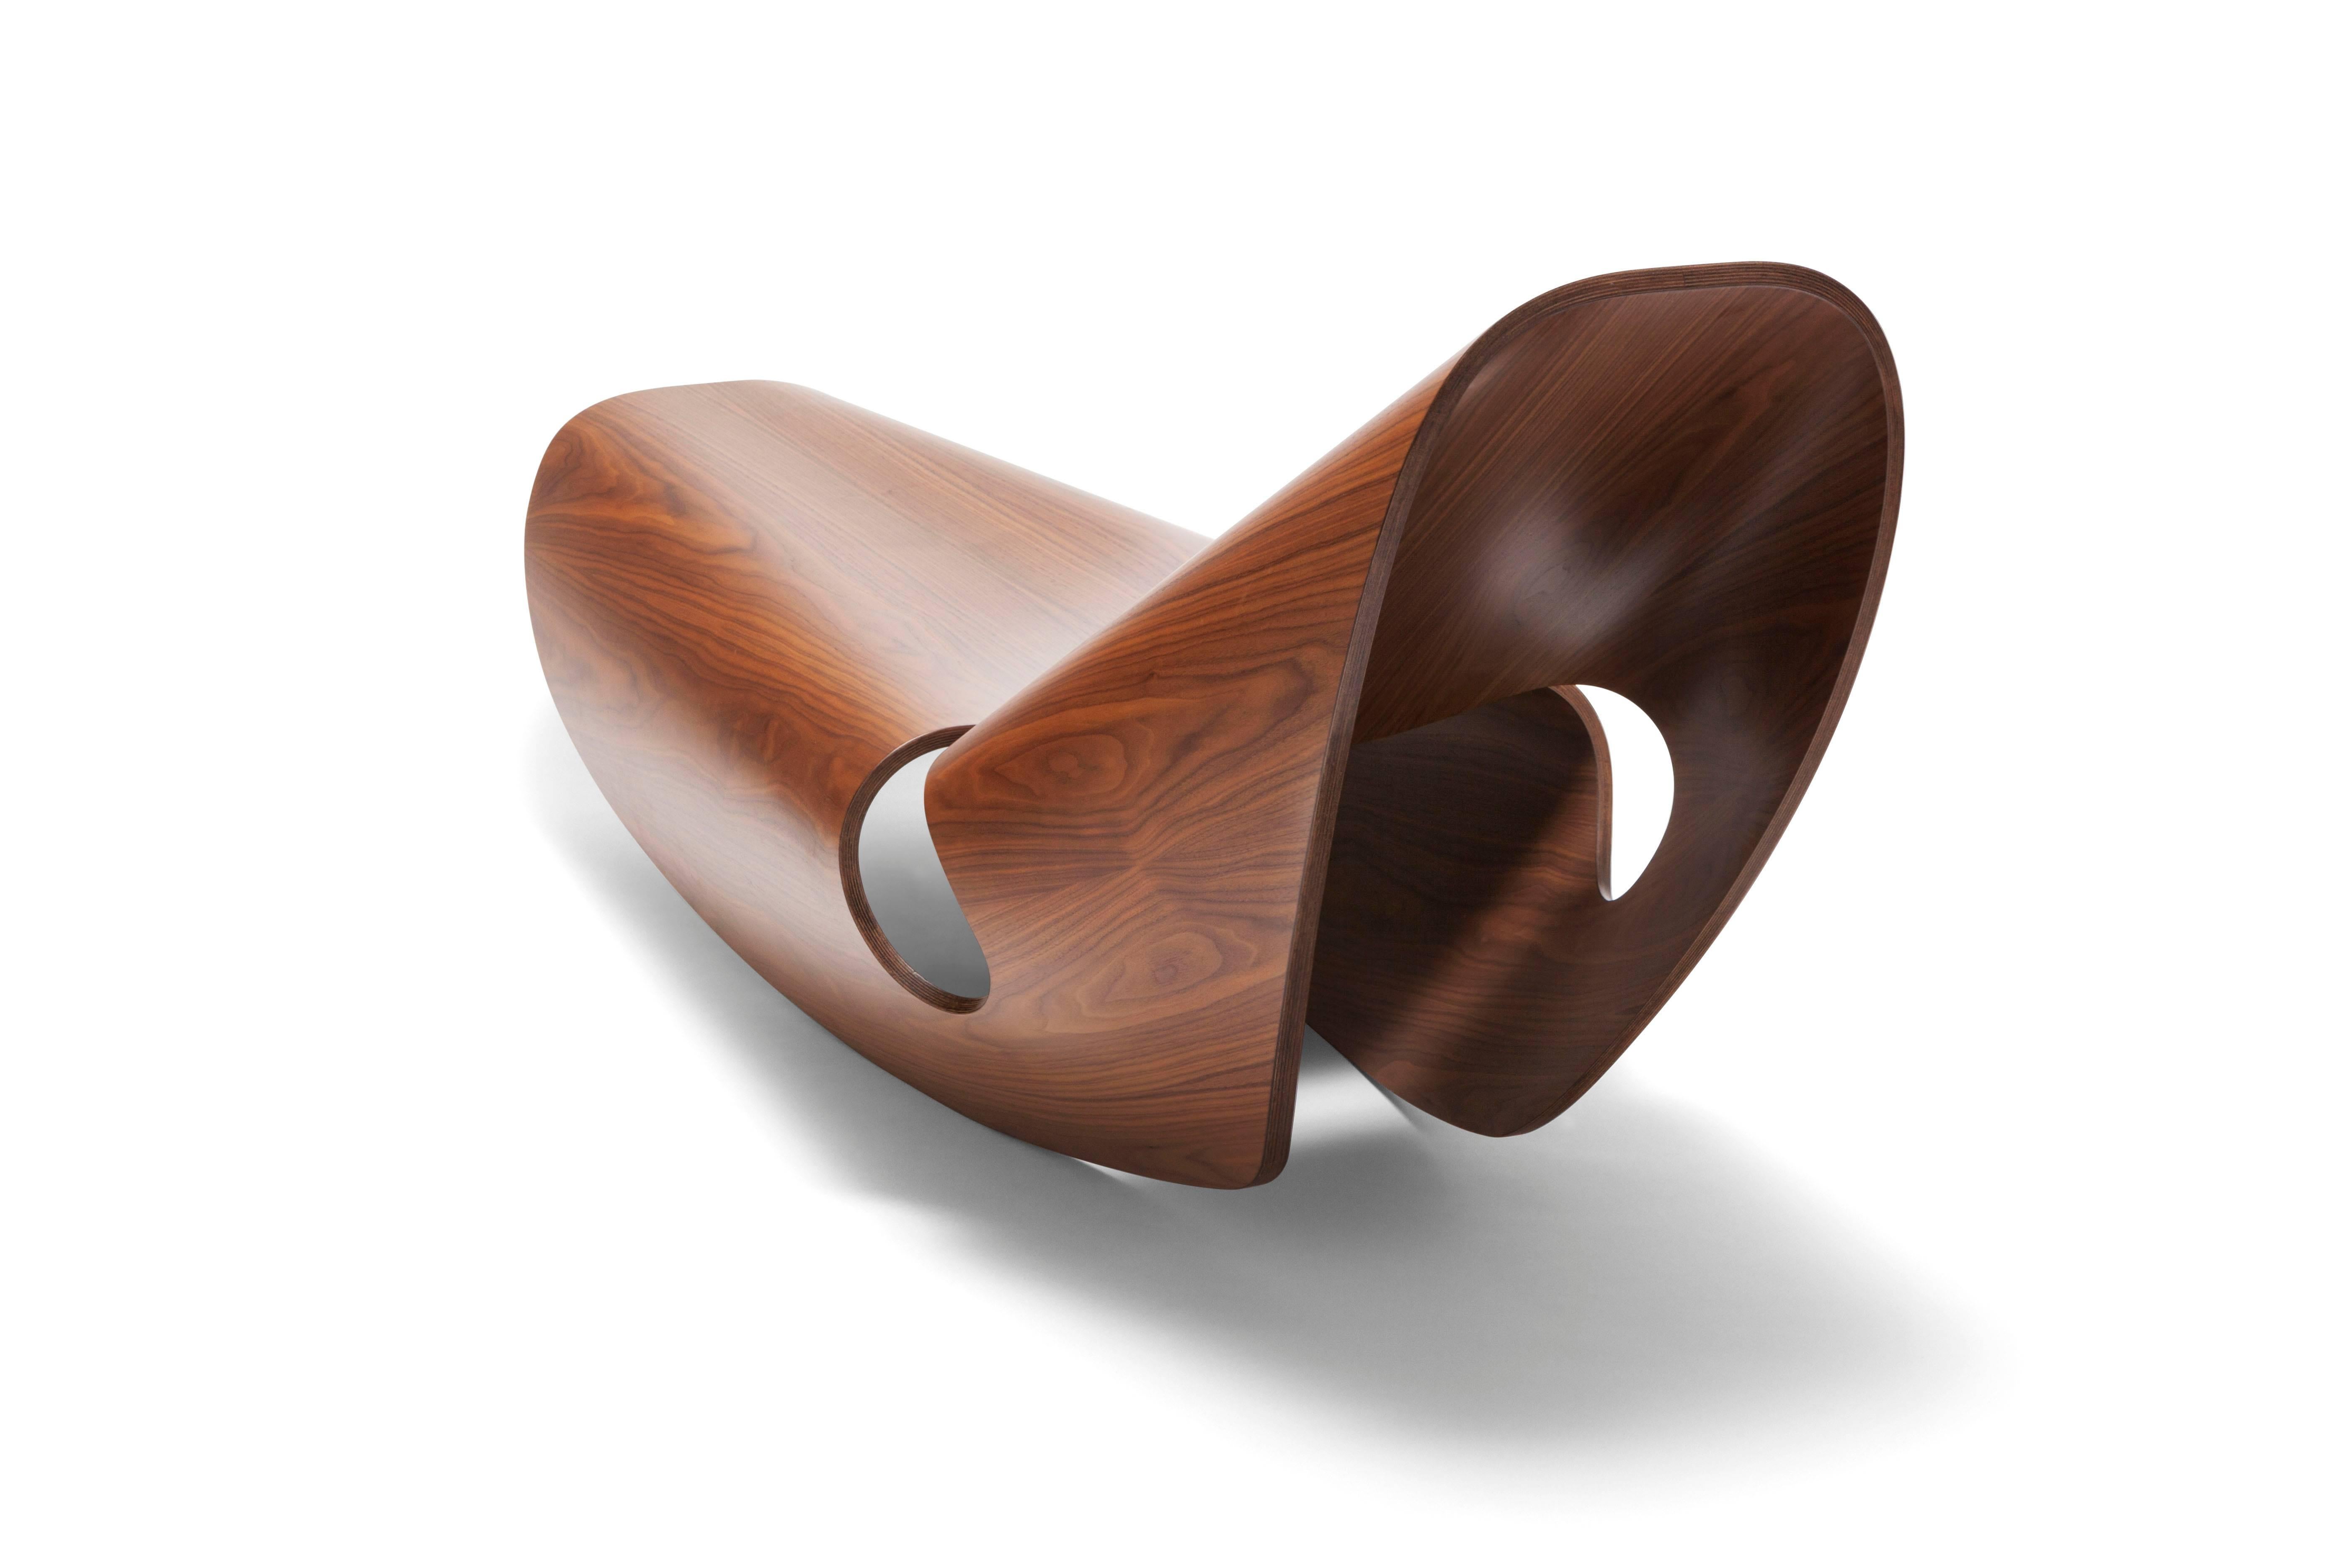 Organic in form, and iconic in design, the Cowrie Rocker is inspired by the concave lines of sea shells. The modern curvilinear form is the result of an extensive research and innovation process that bridges the handmade with the digital. Sweeping